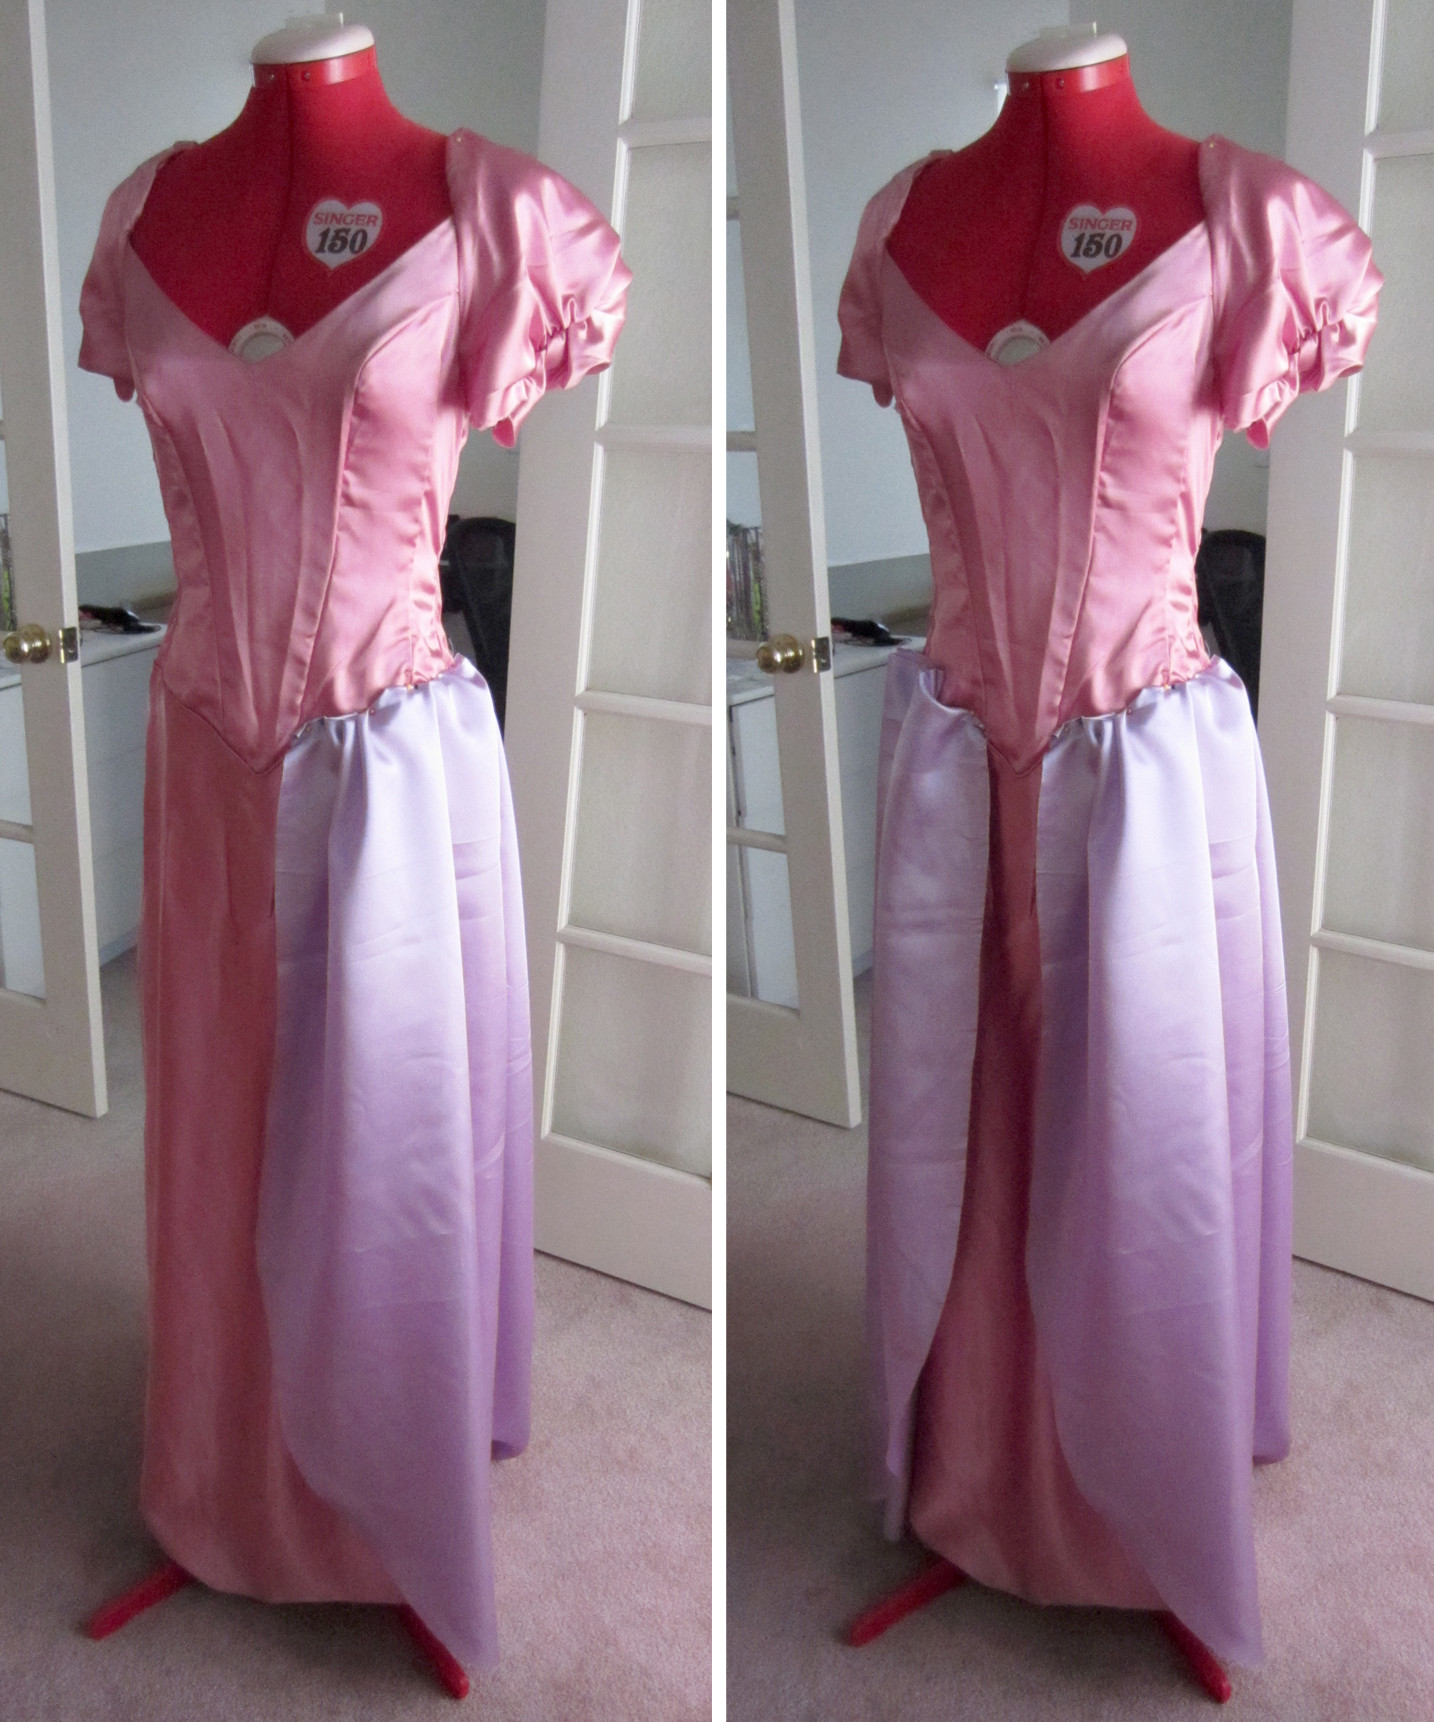 DIY Rapunzel Costume
 301 Moved Permanently